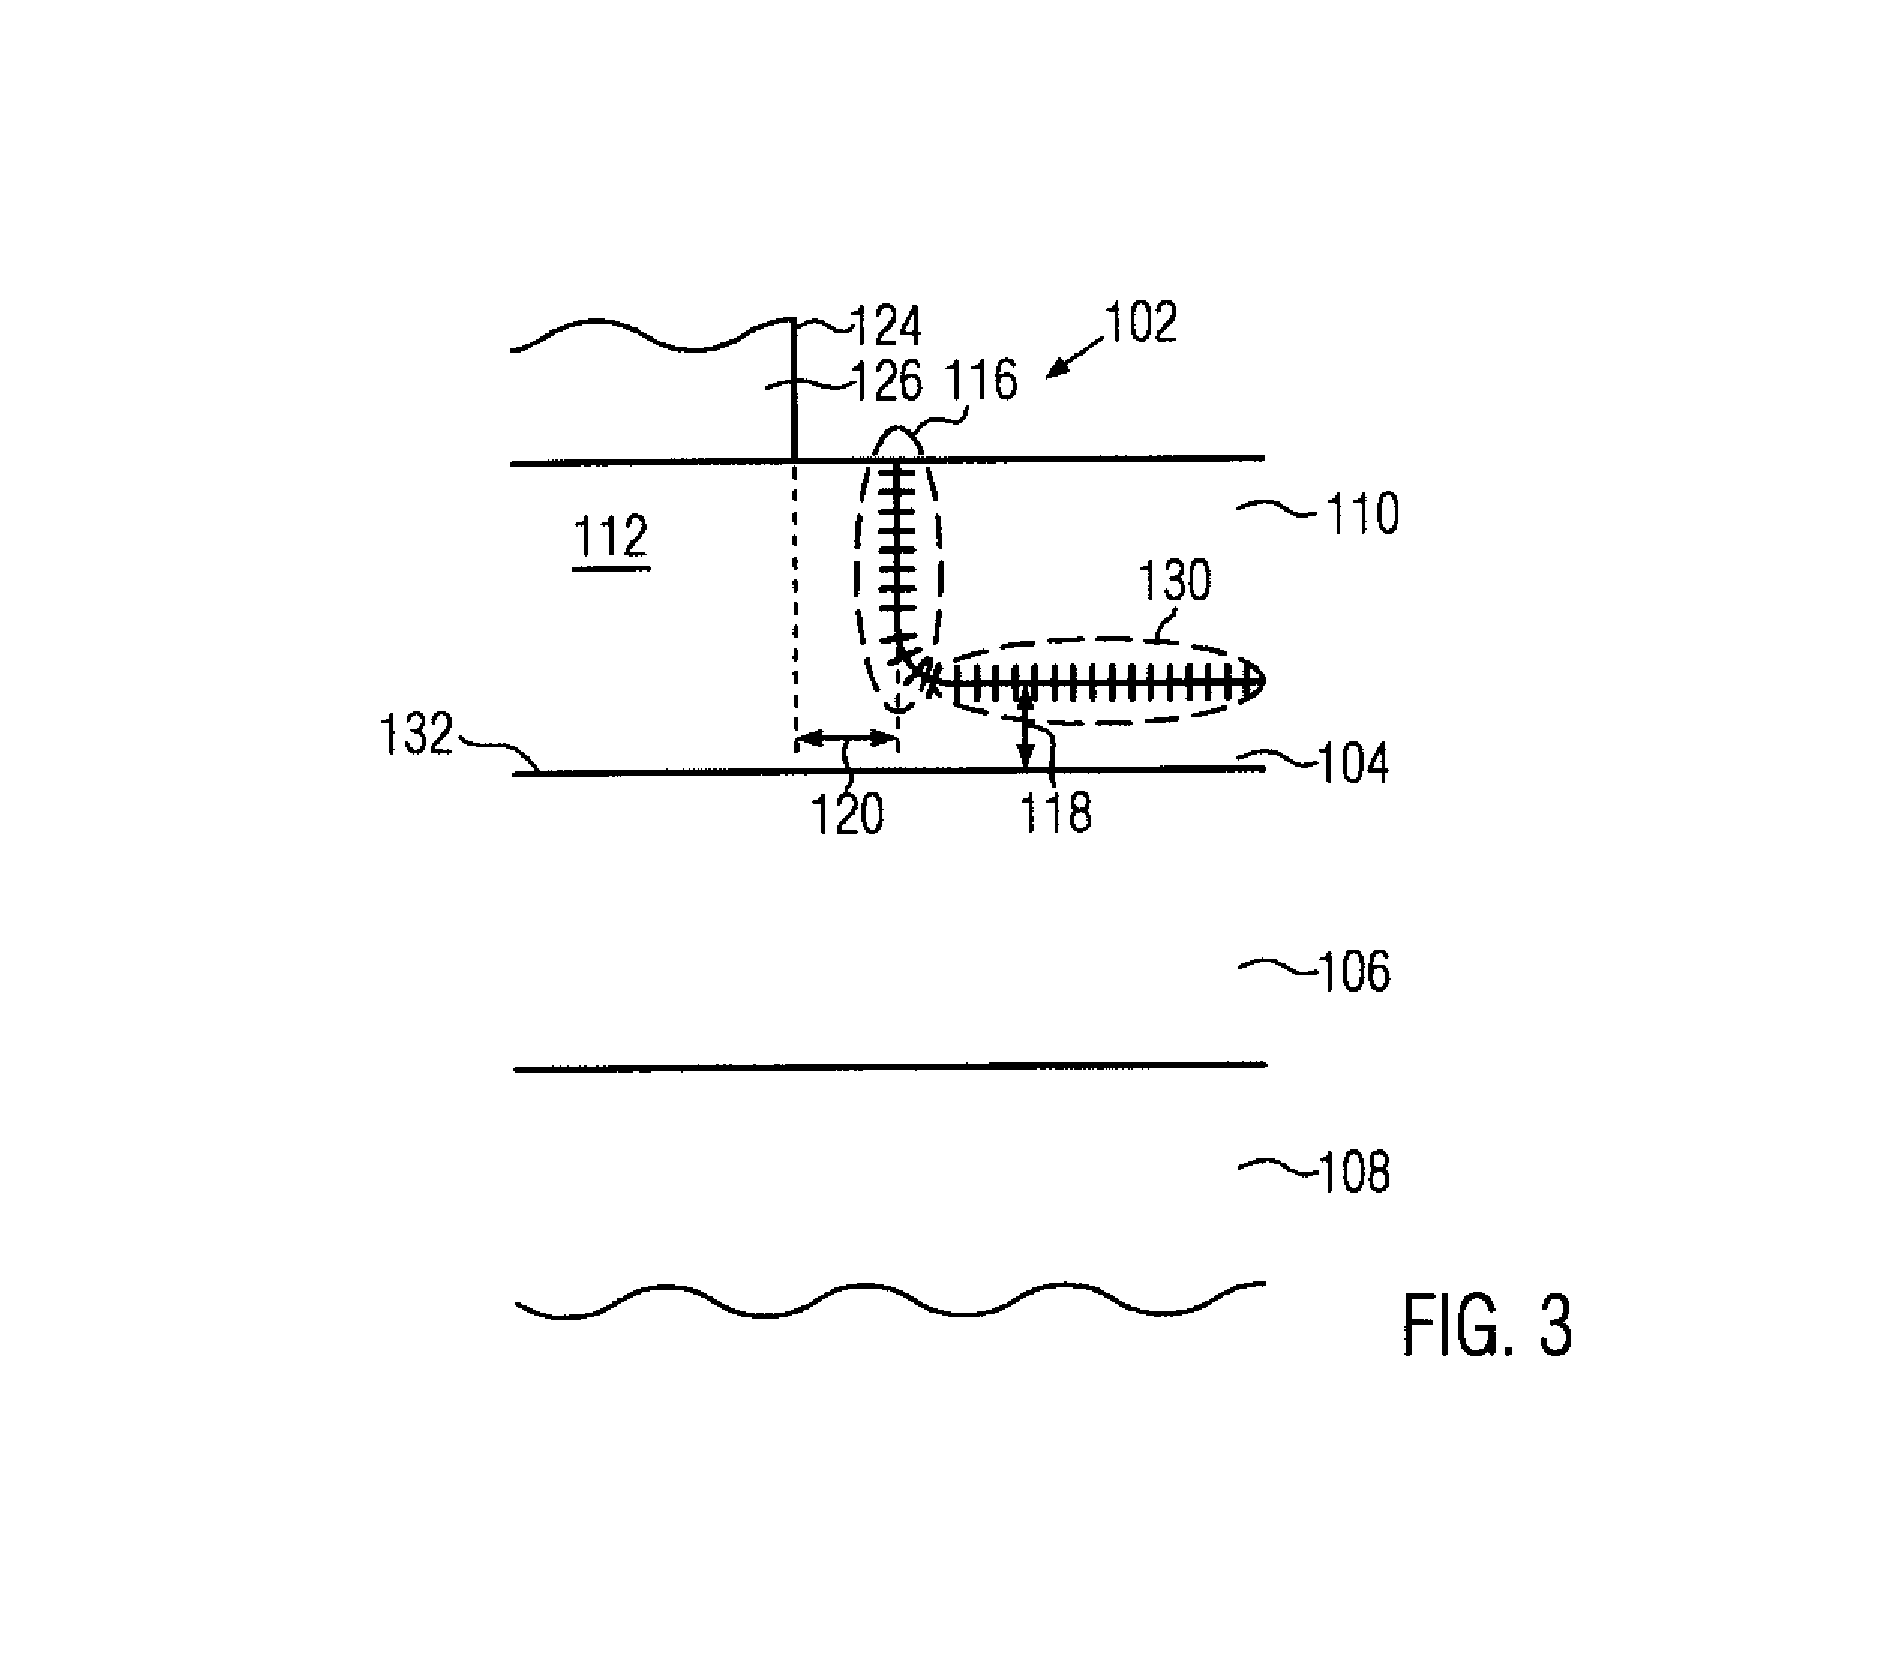 Transistor with embedded silicon/germanium material on a strained semiconductor on insulator substrate